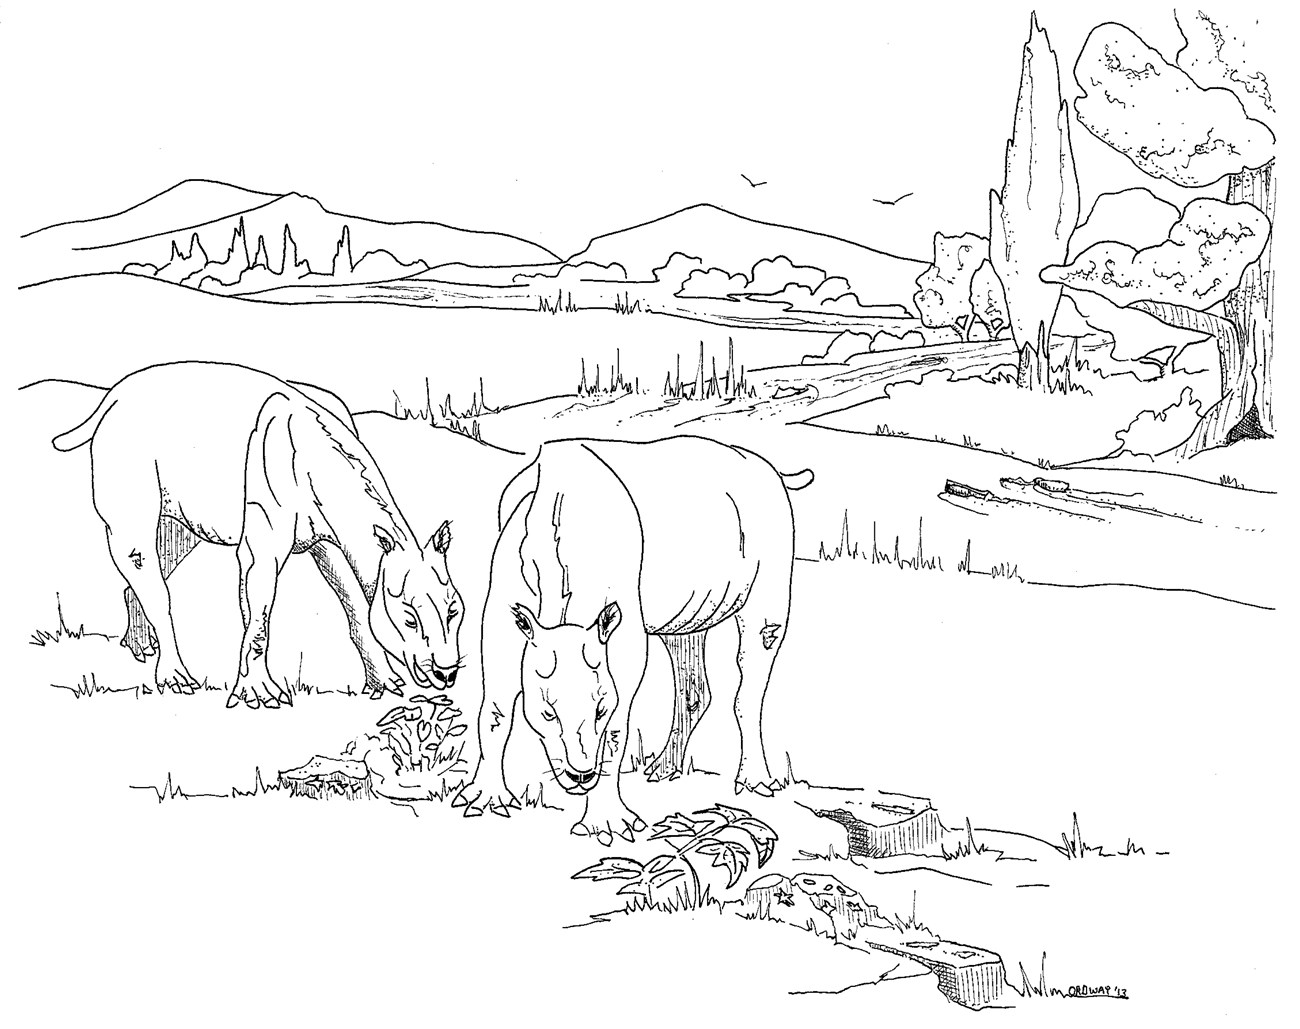 A black and white coloring page of two oreodonts (pig-like herbivores) browsing.